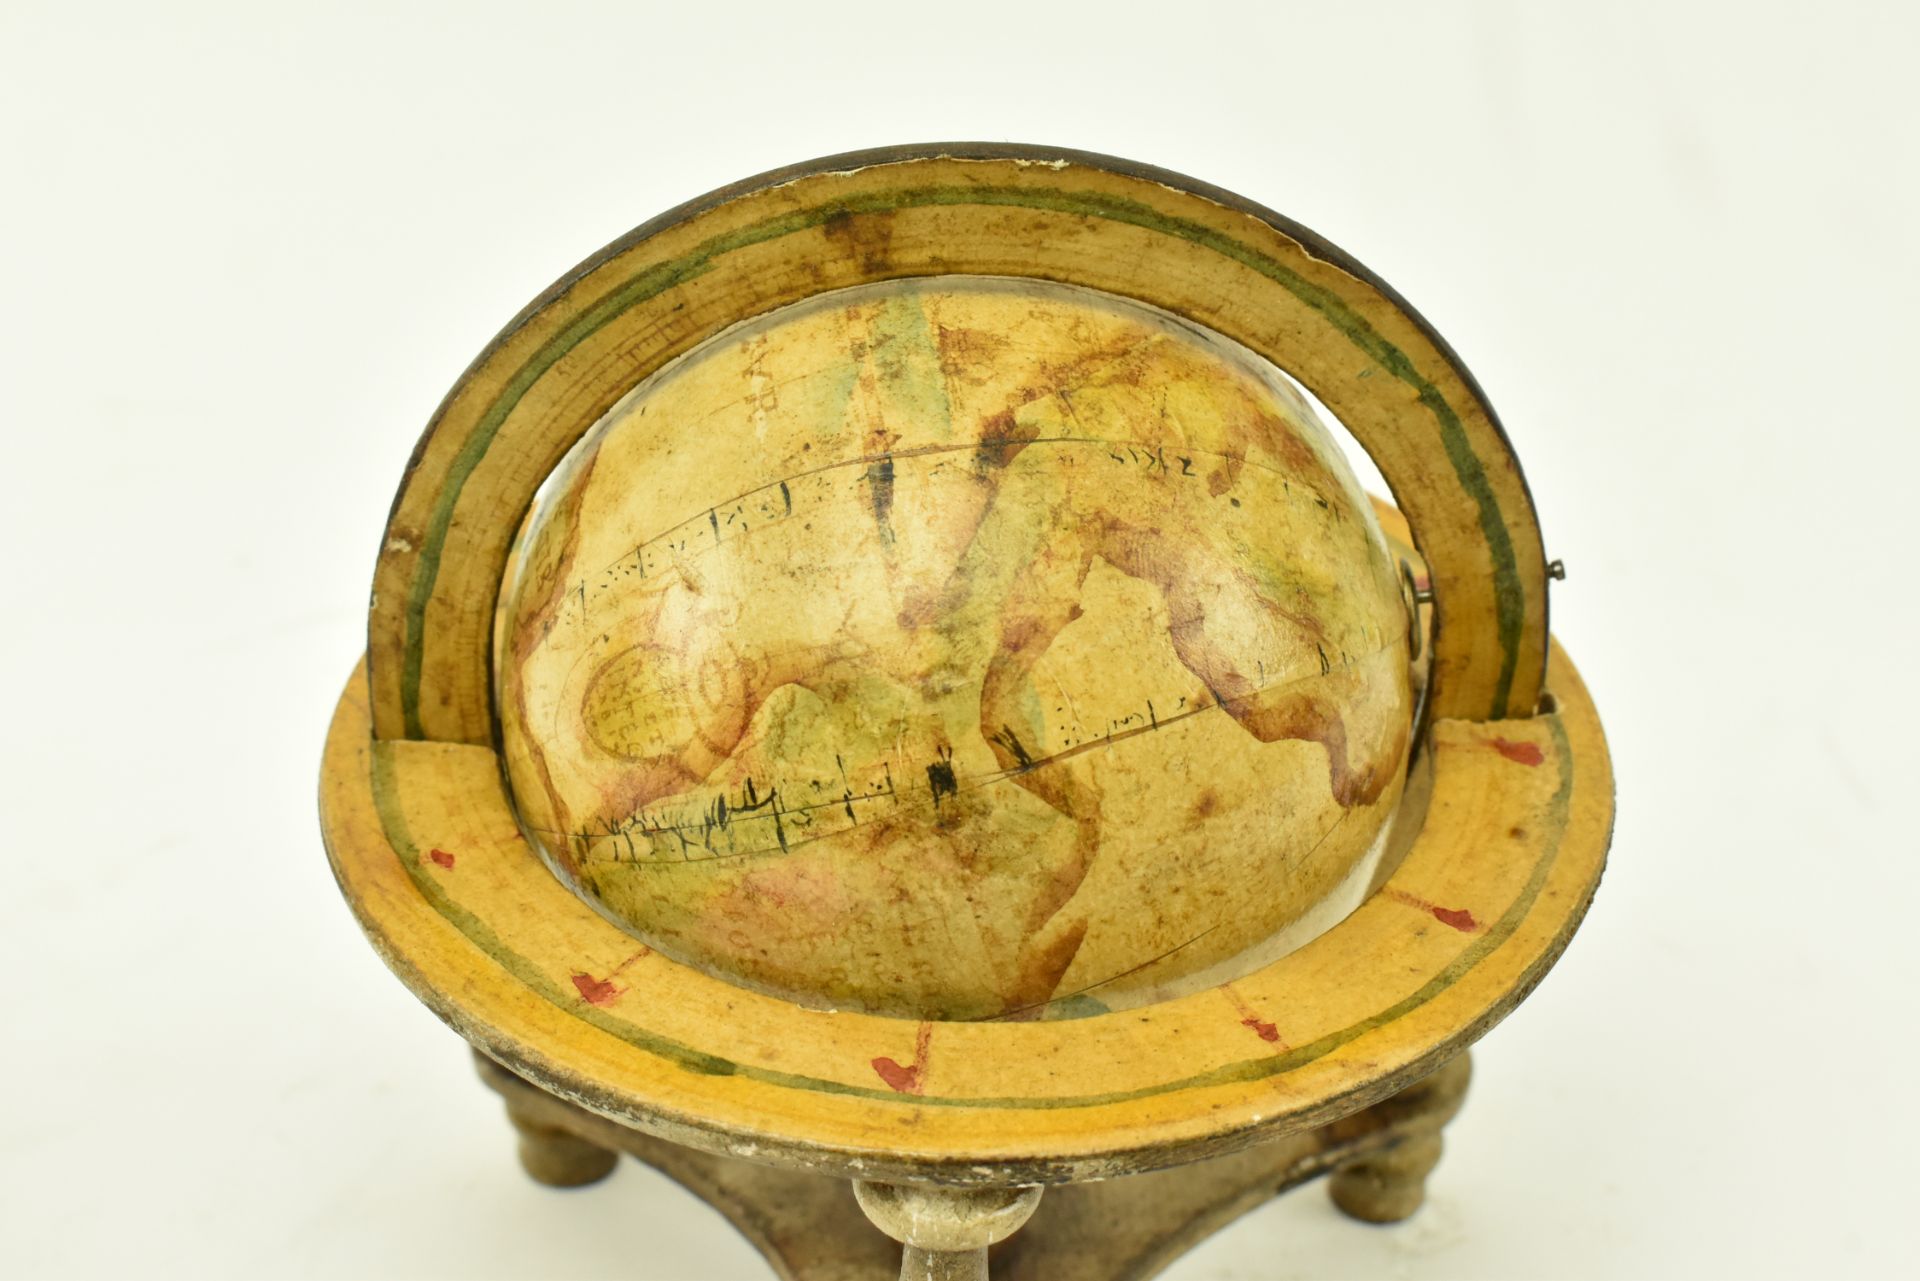 PAIR OF EARLY 20TH CENTURY METAL & WOOD CELESTIAL GLOBES - Image 3 of 6